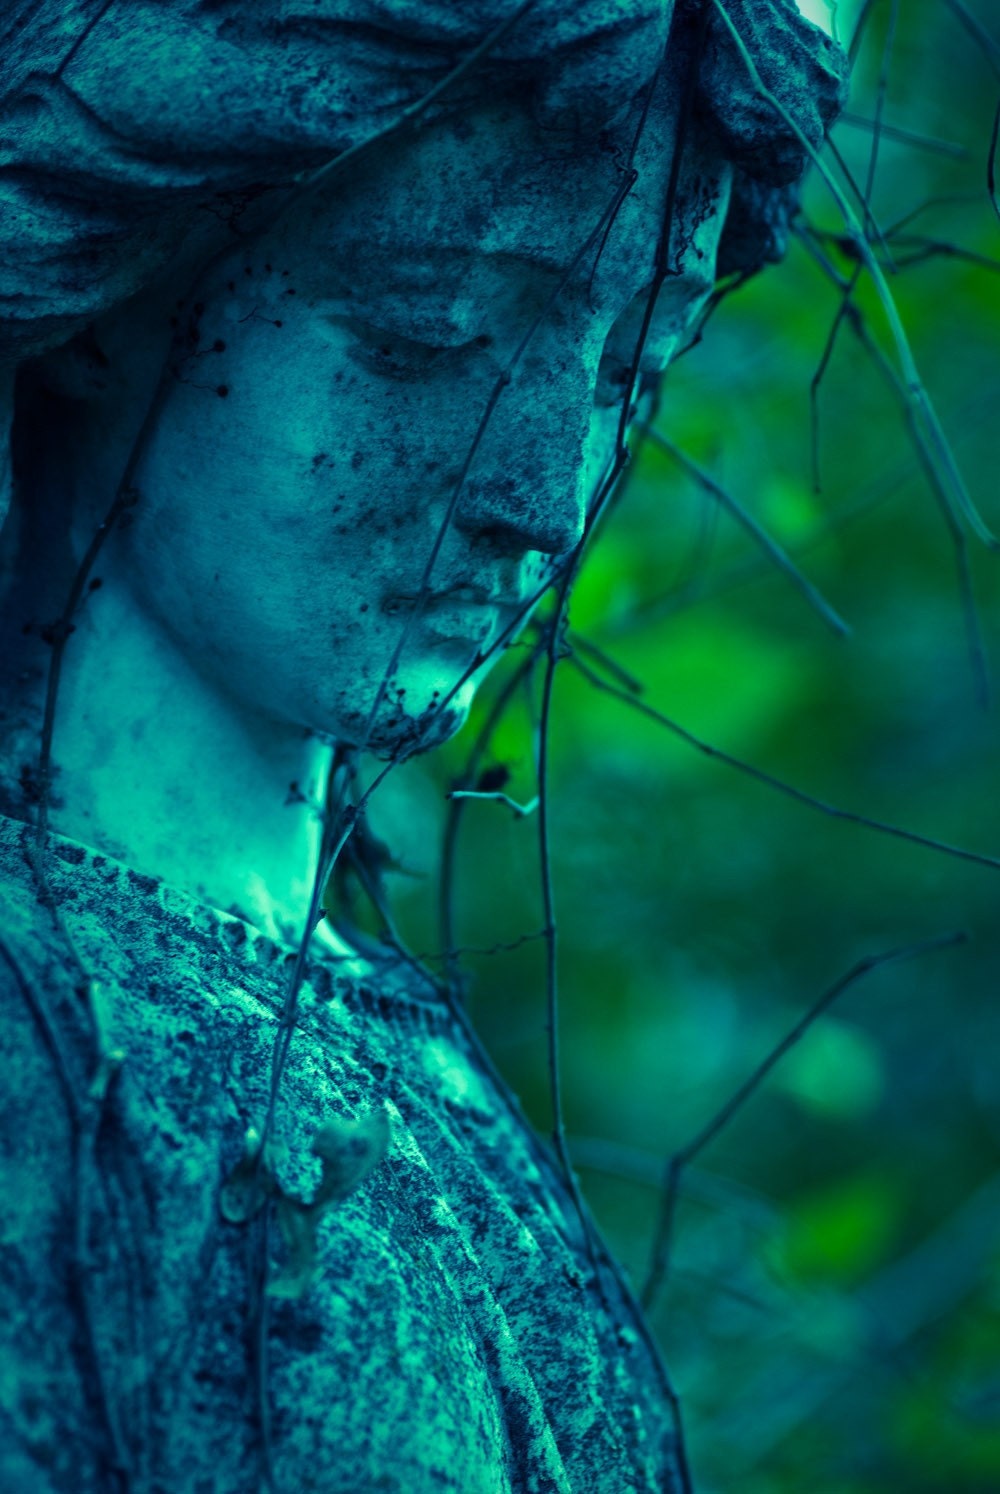 Cemetery Photograph - Angel Face, Blue and Green, Condolence Gift, Tombstone, Sadness and Grief, Graveyard - Angel - 8 x 12 - Fine Art Photo - Squintphotography